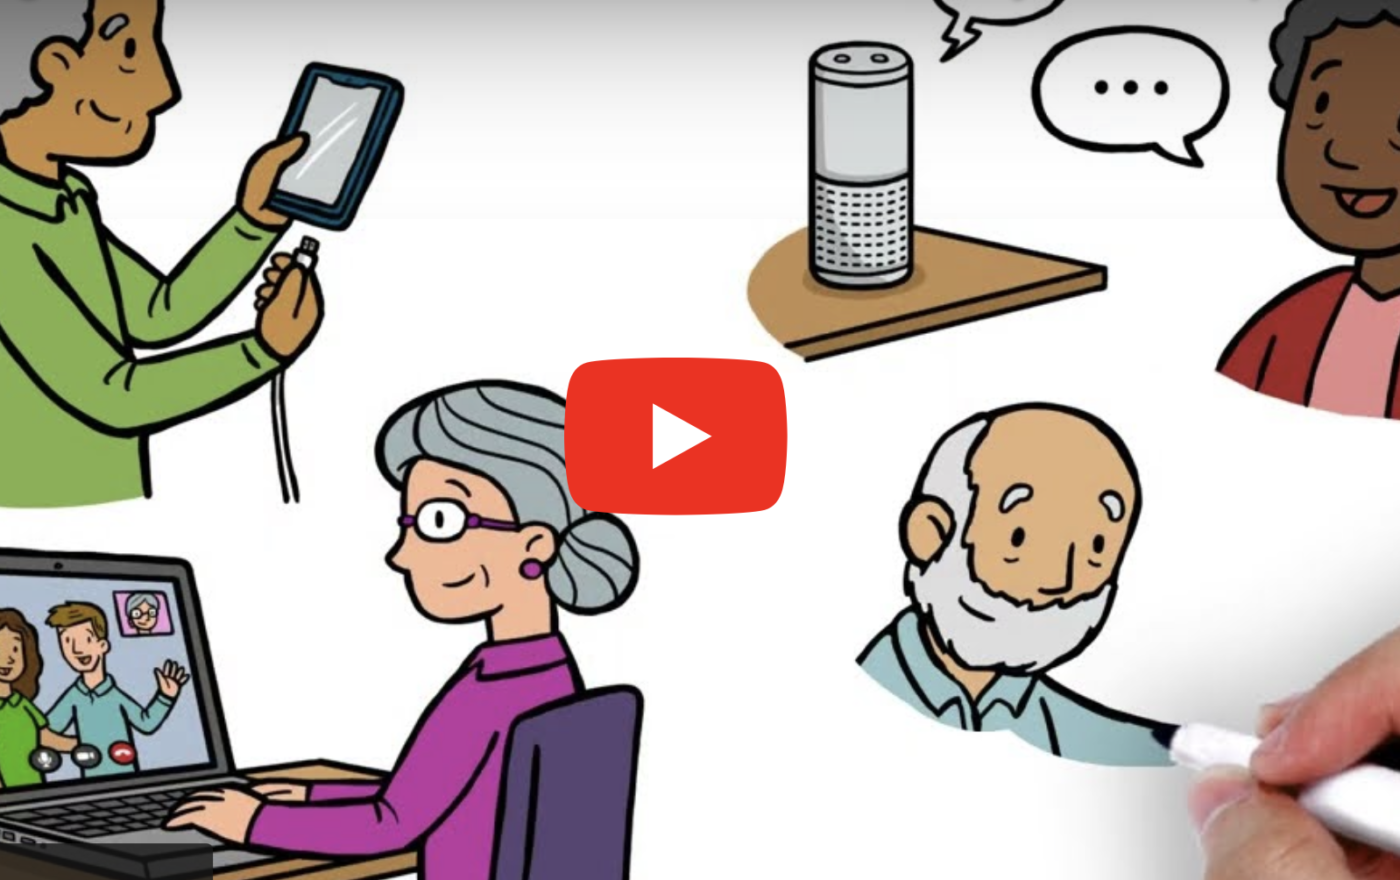 still from a video clip showing cartoons of people using smart care technology